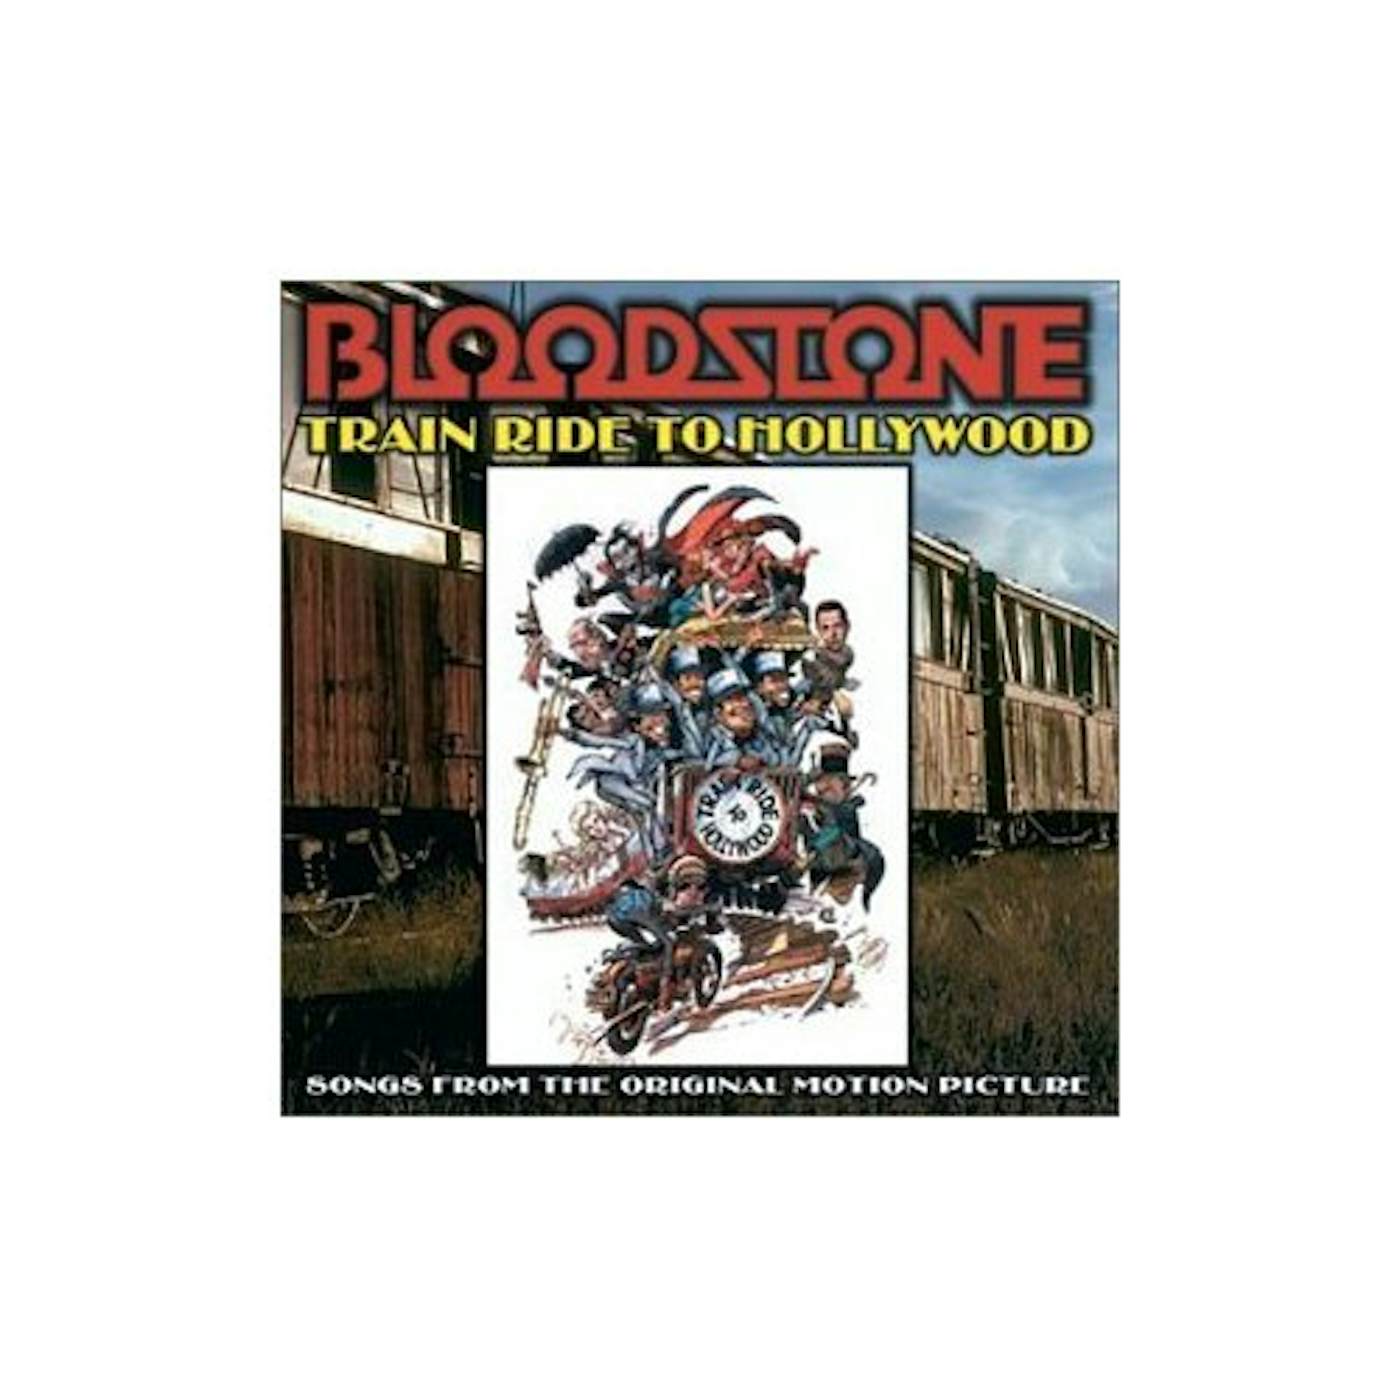 Bloodstone TRAIN RIDE TO HOLLYWOOD: Original Soundtrack CD